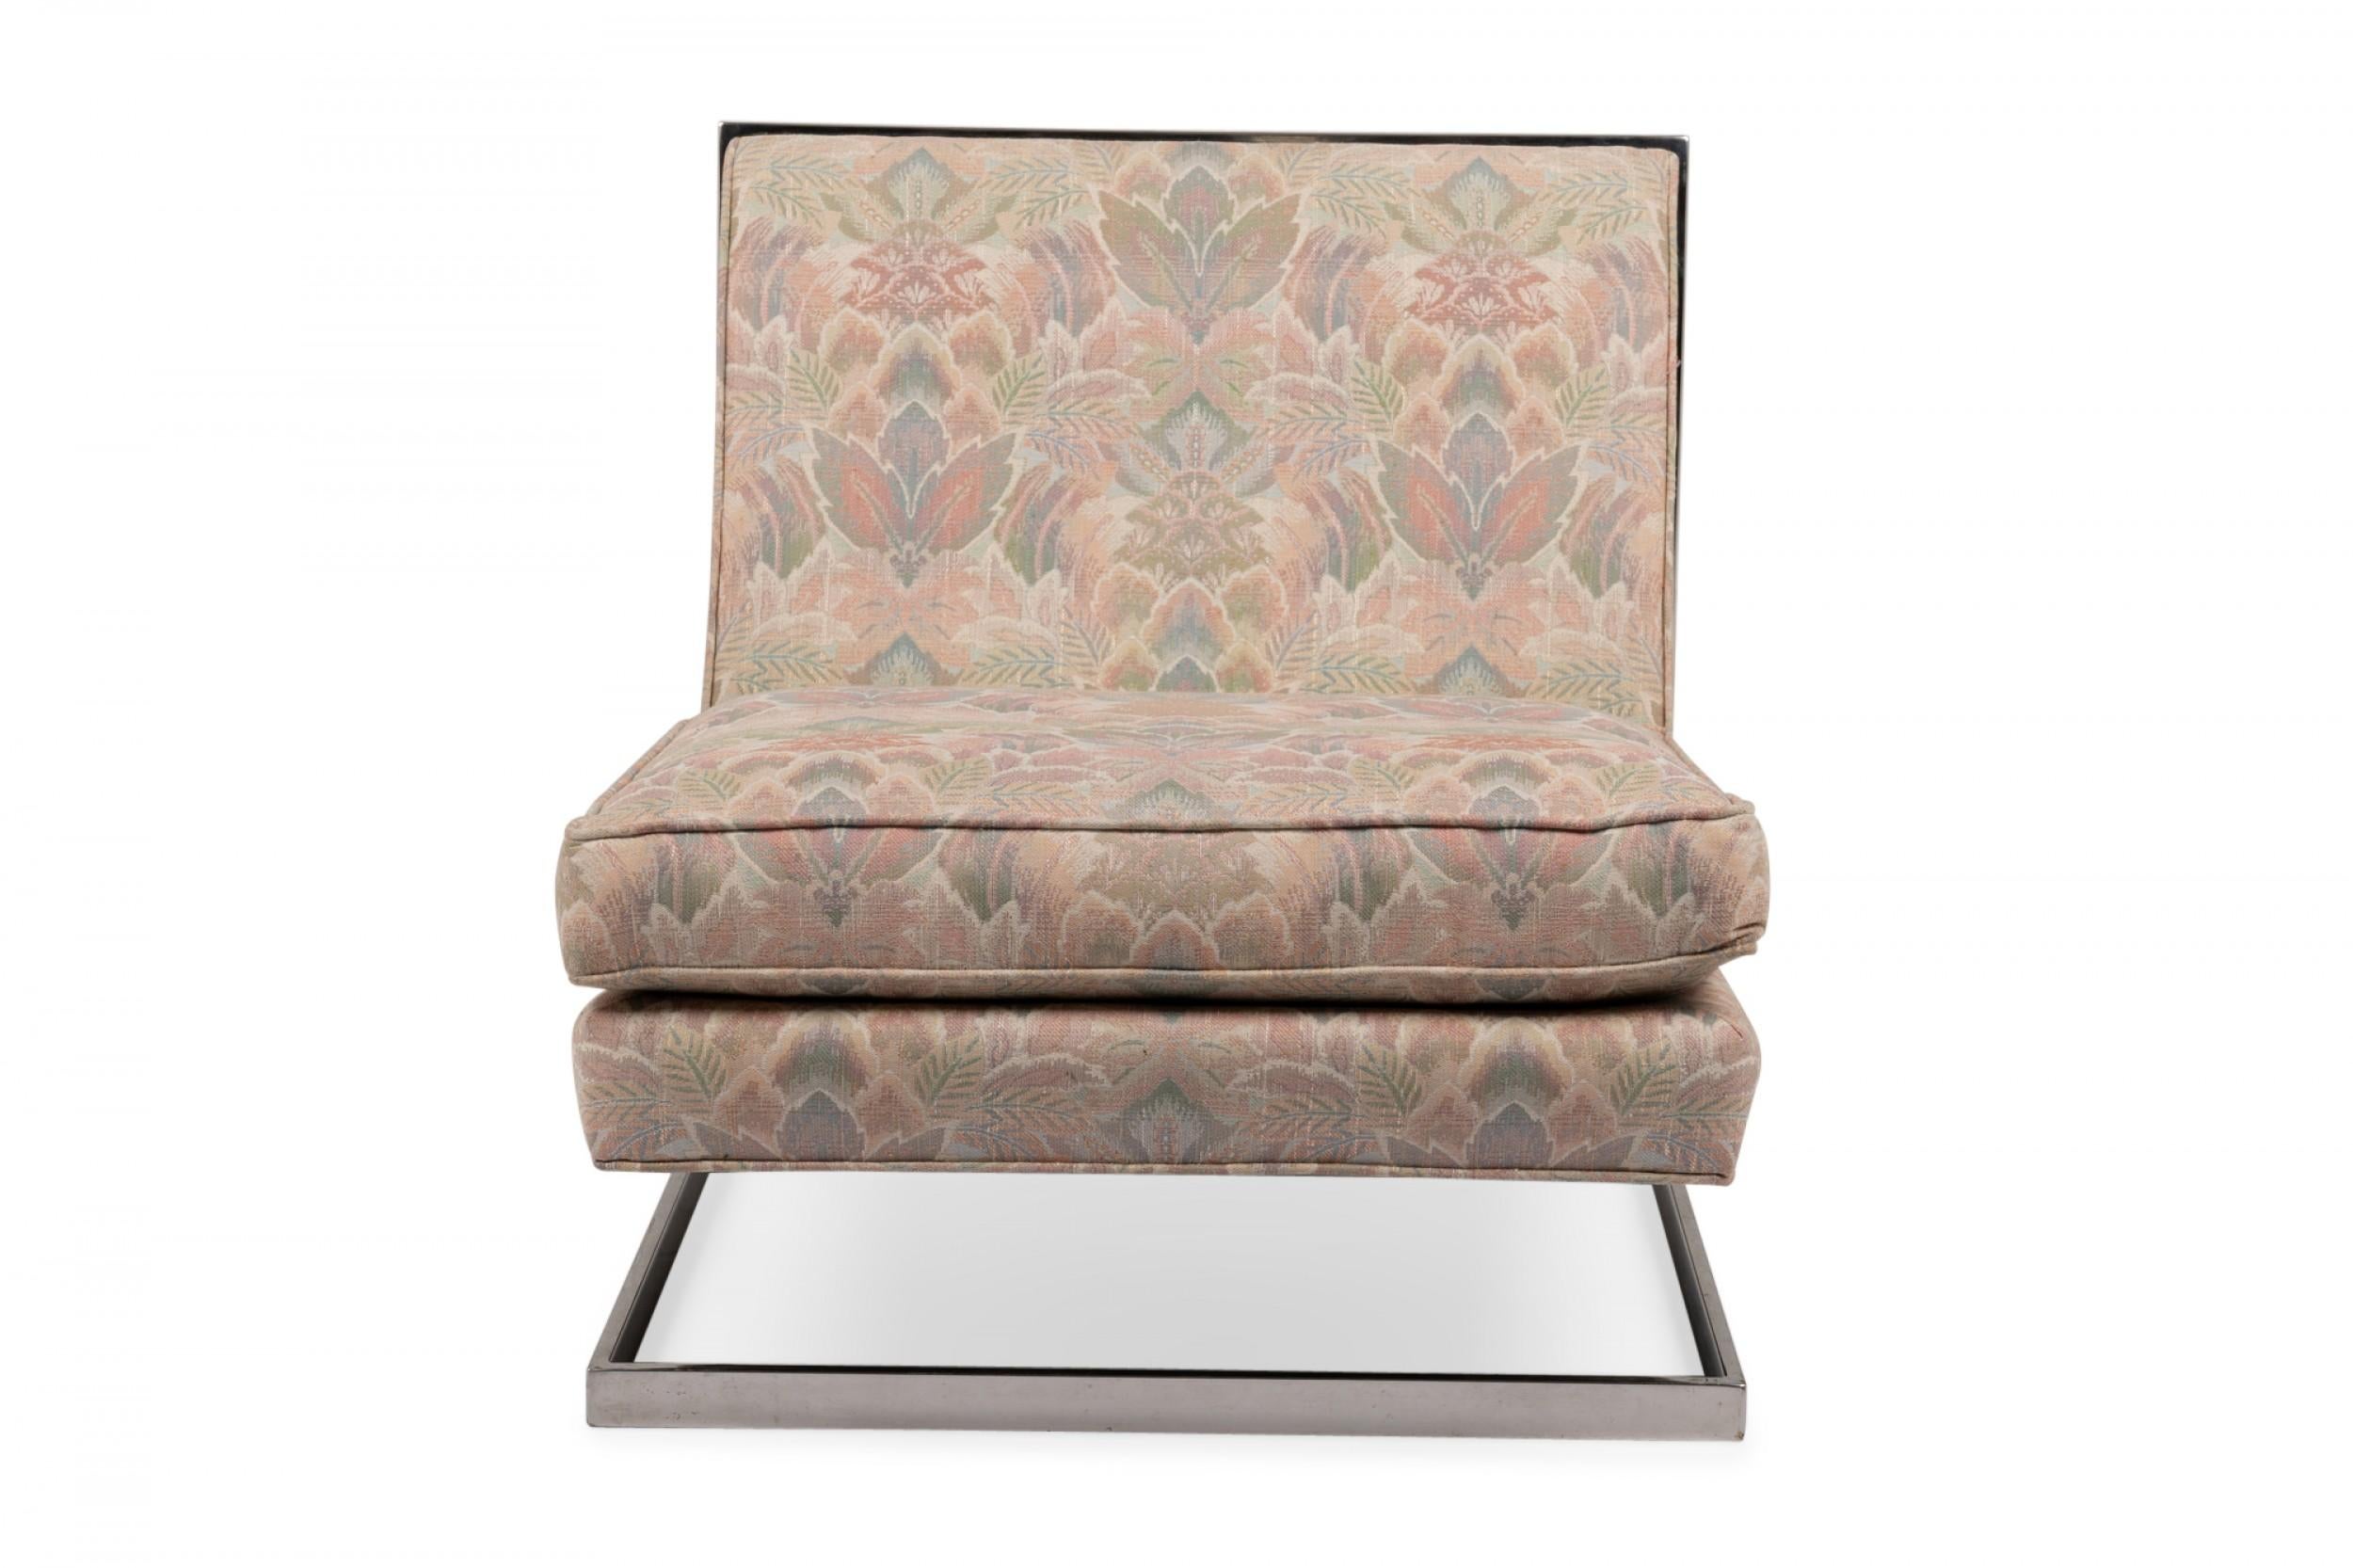 American Mid-Century floating slipper chair with pink, green, and beige floral fabric upholstery with a removable seat cushion, supported by a square chrome tube frame. (manner of MILO BAUGHMAN).
 